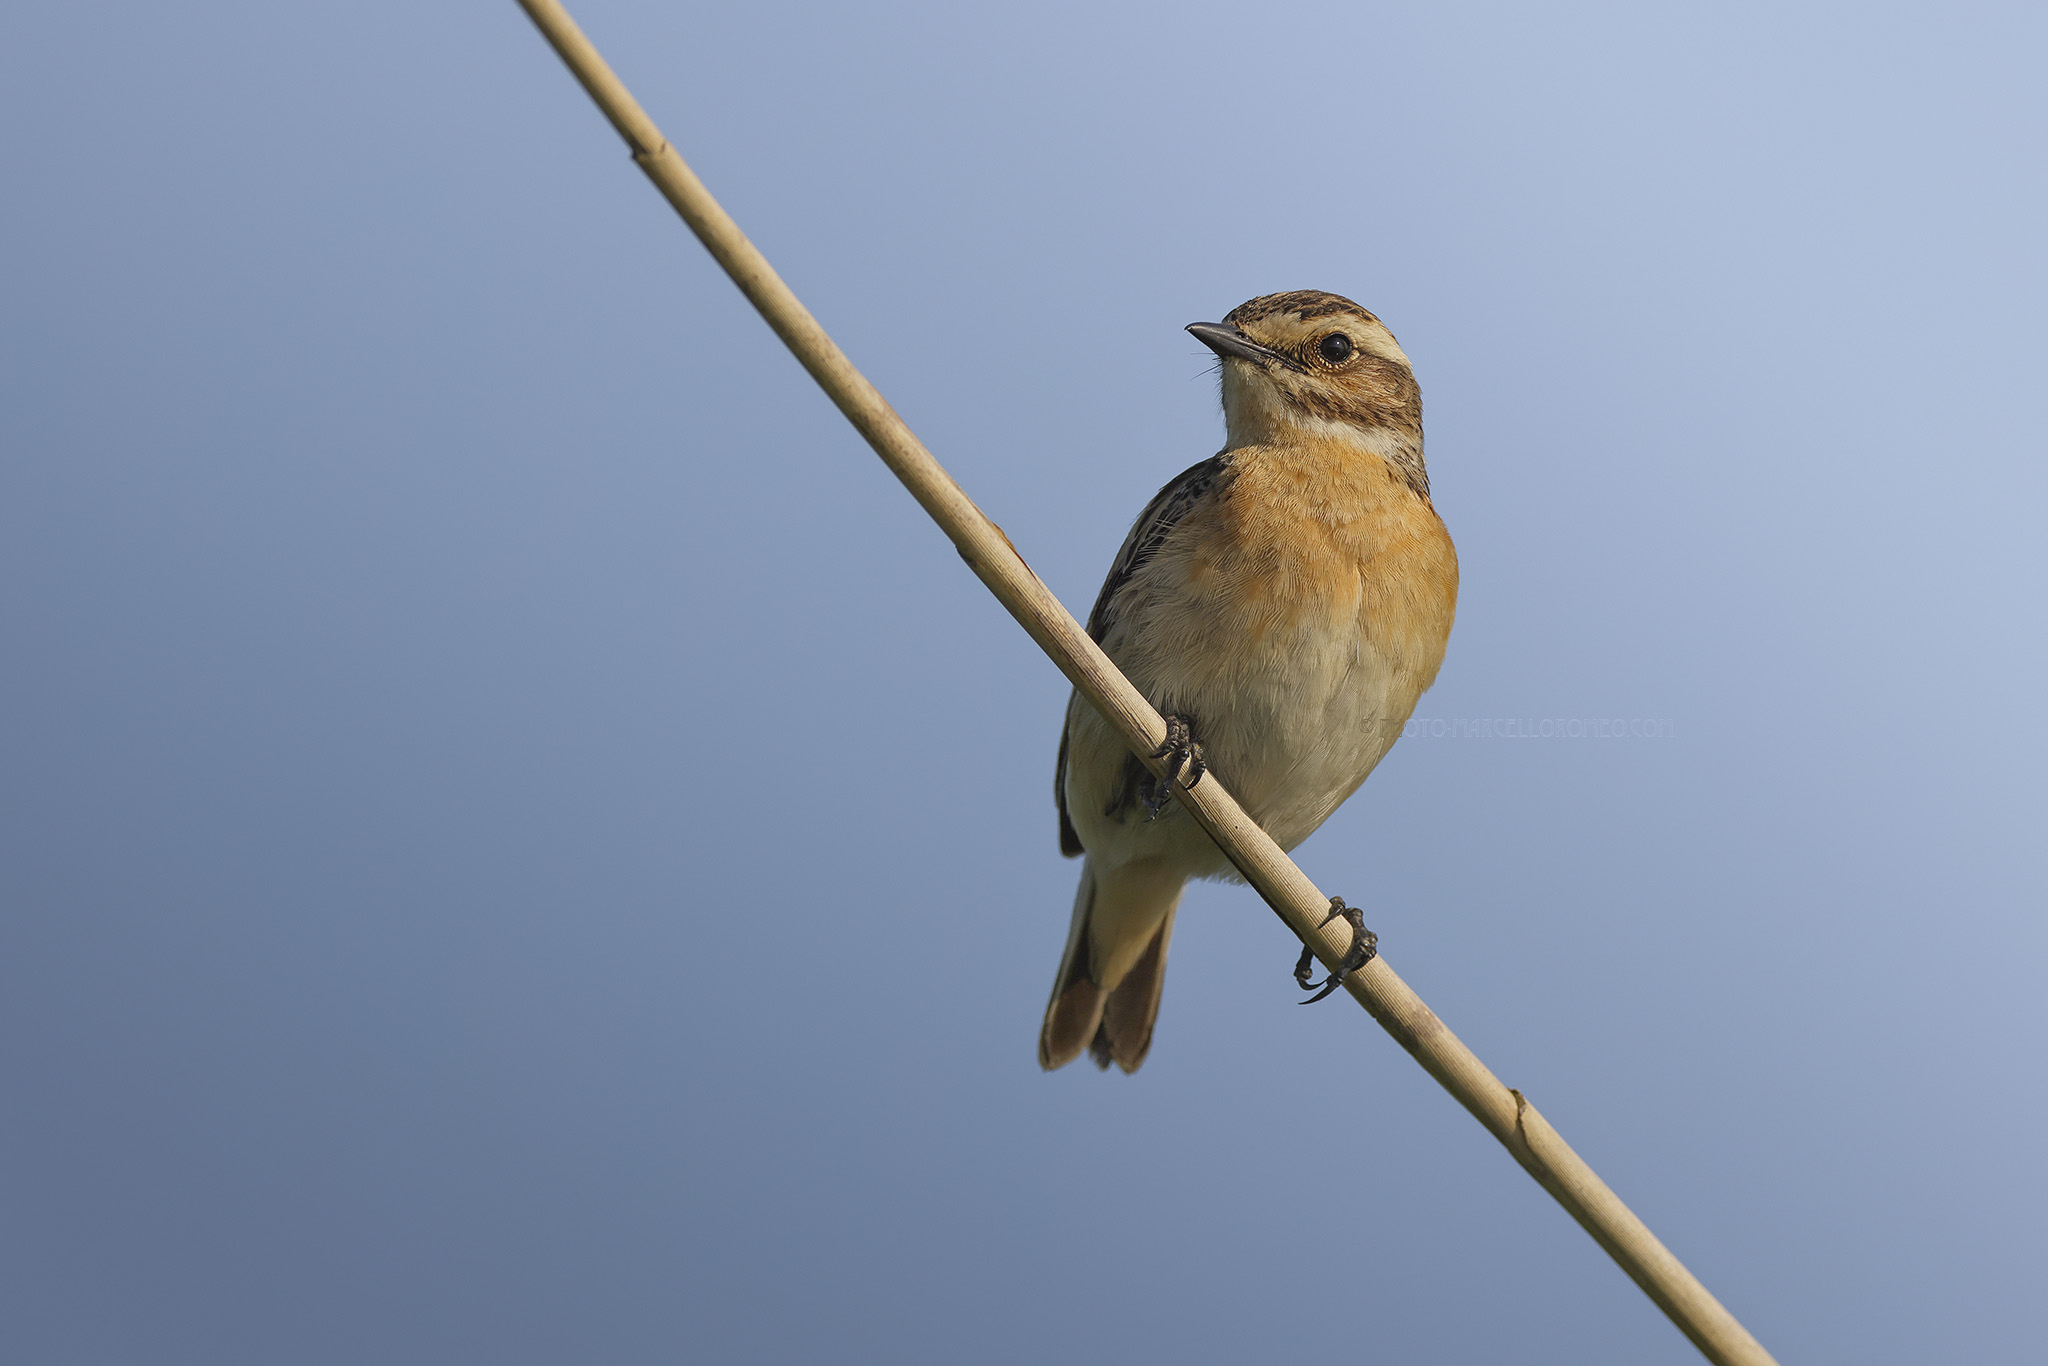 Paapje; Whinchat; Saxicola rubetra